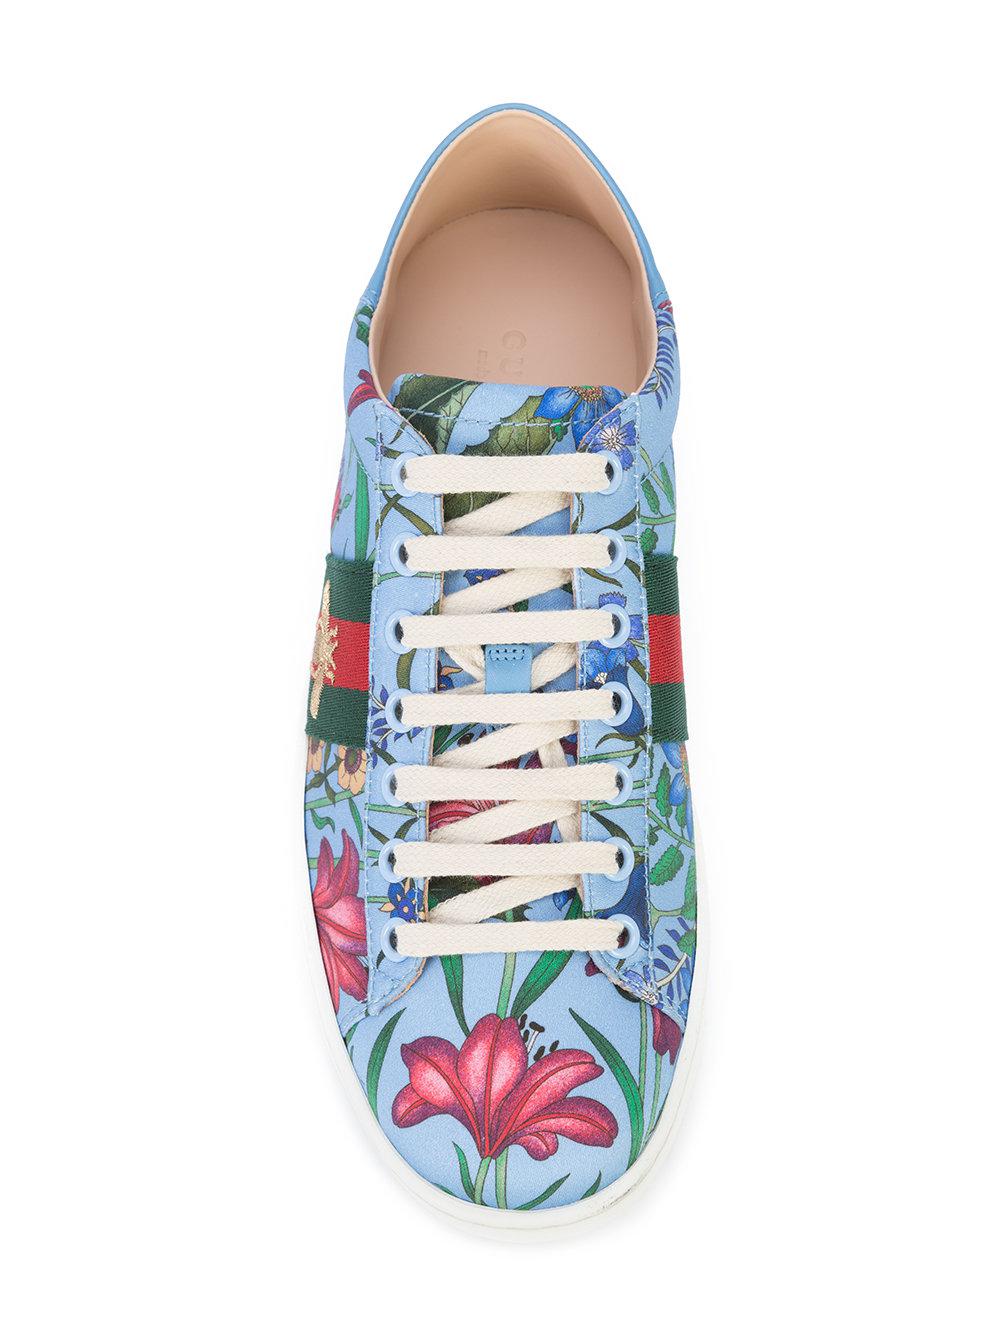 Gucci Leather Ace New Floral Print Sneakers in Blue - Lyst